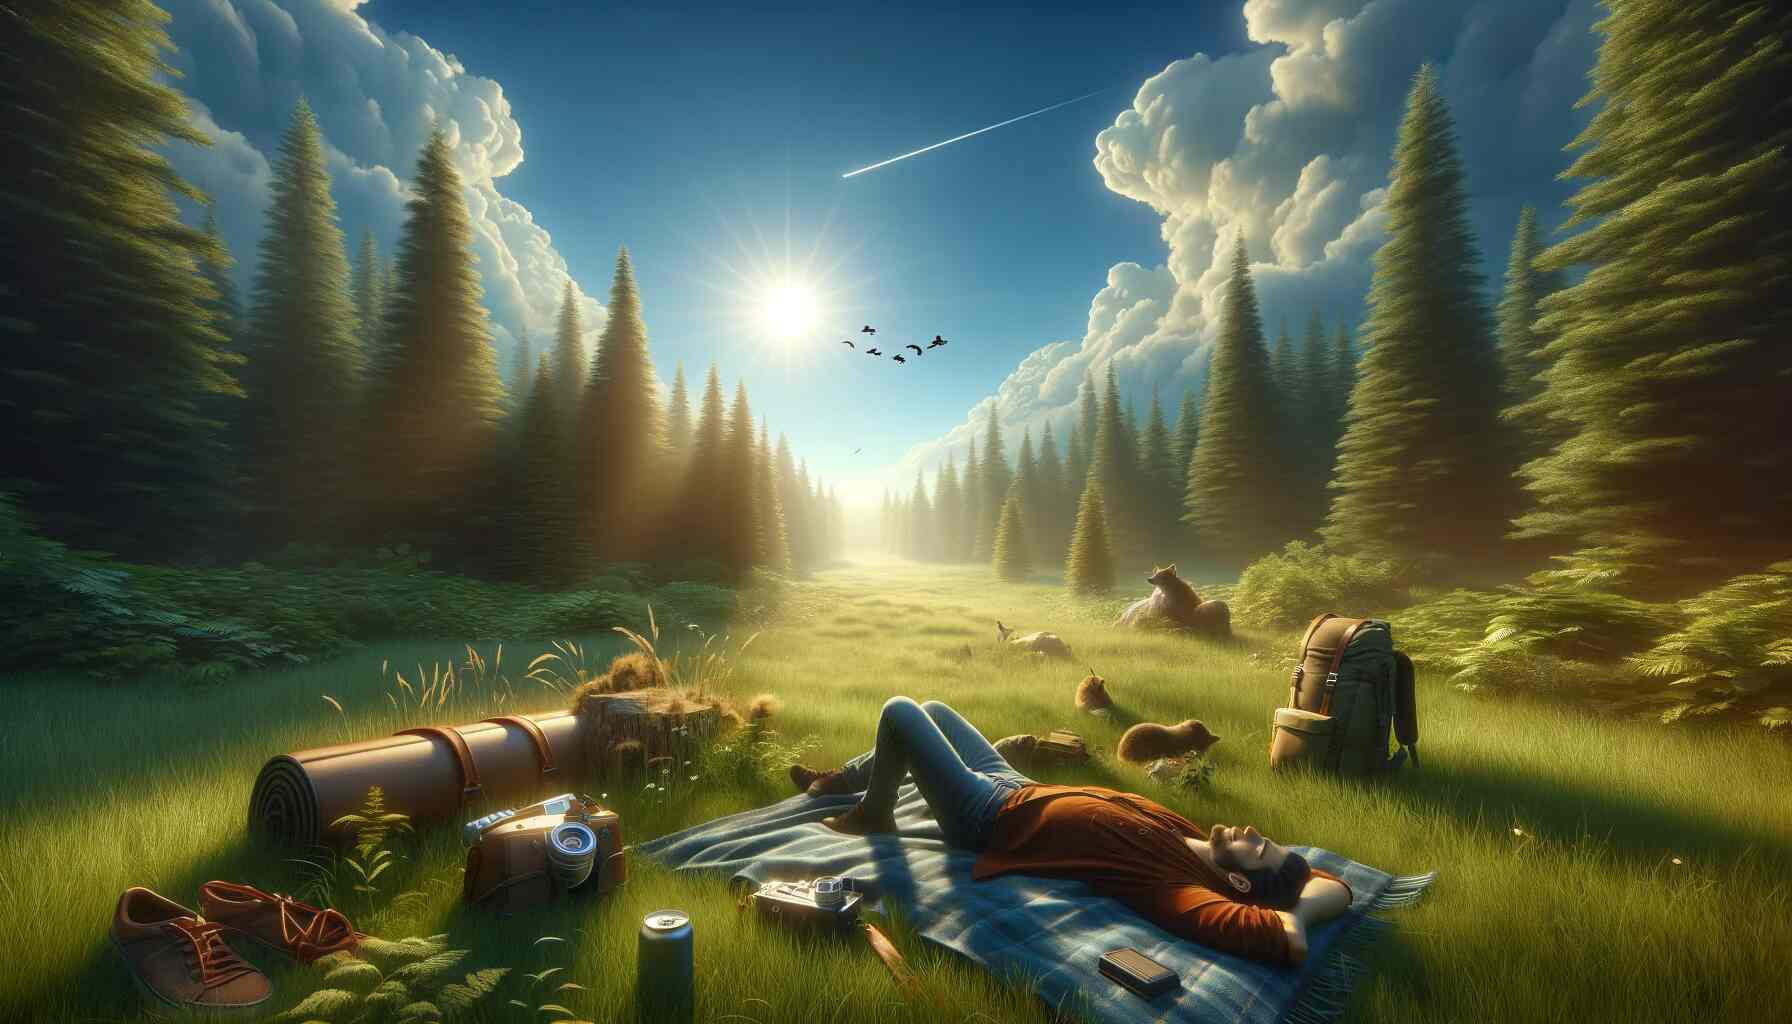 Realistic image of a person lying on a blanket in a lush, grassy field, looking relaxed yet tired, with a backpack, water bottle, and camera nearby, symbolizing an active day spent outdoors. The scene includes a verdant forest and a clear blue sky with the sun shining, reflecting the passage of time and energy expended in nature. The overall atmosphere is serene and natural, emphasizing the rejuvenating yet tiring effects of spending time in the outdoors